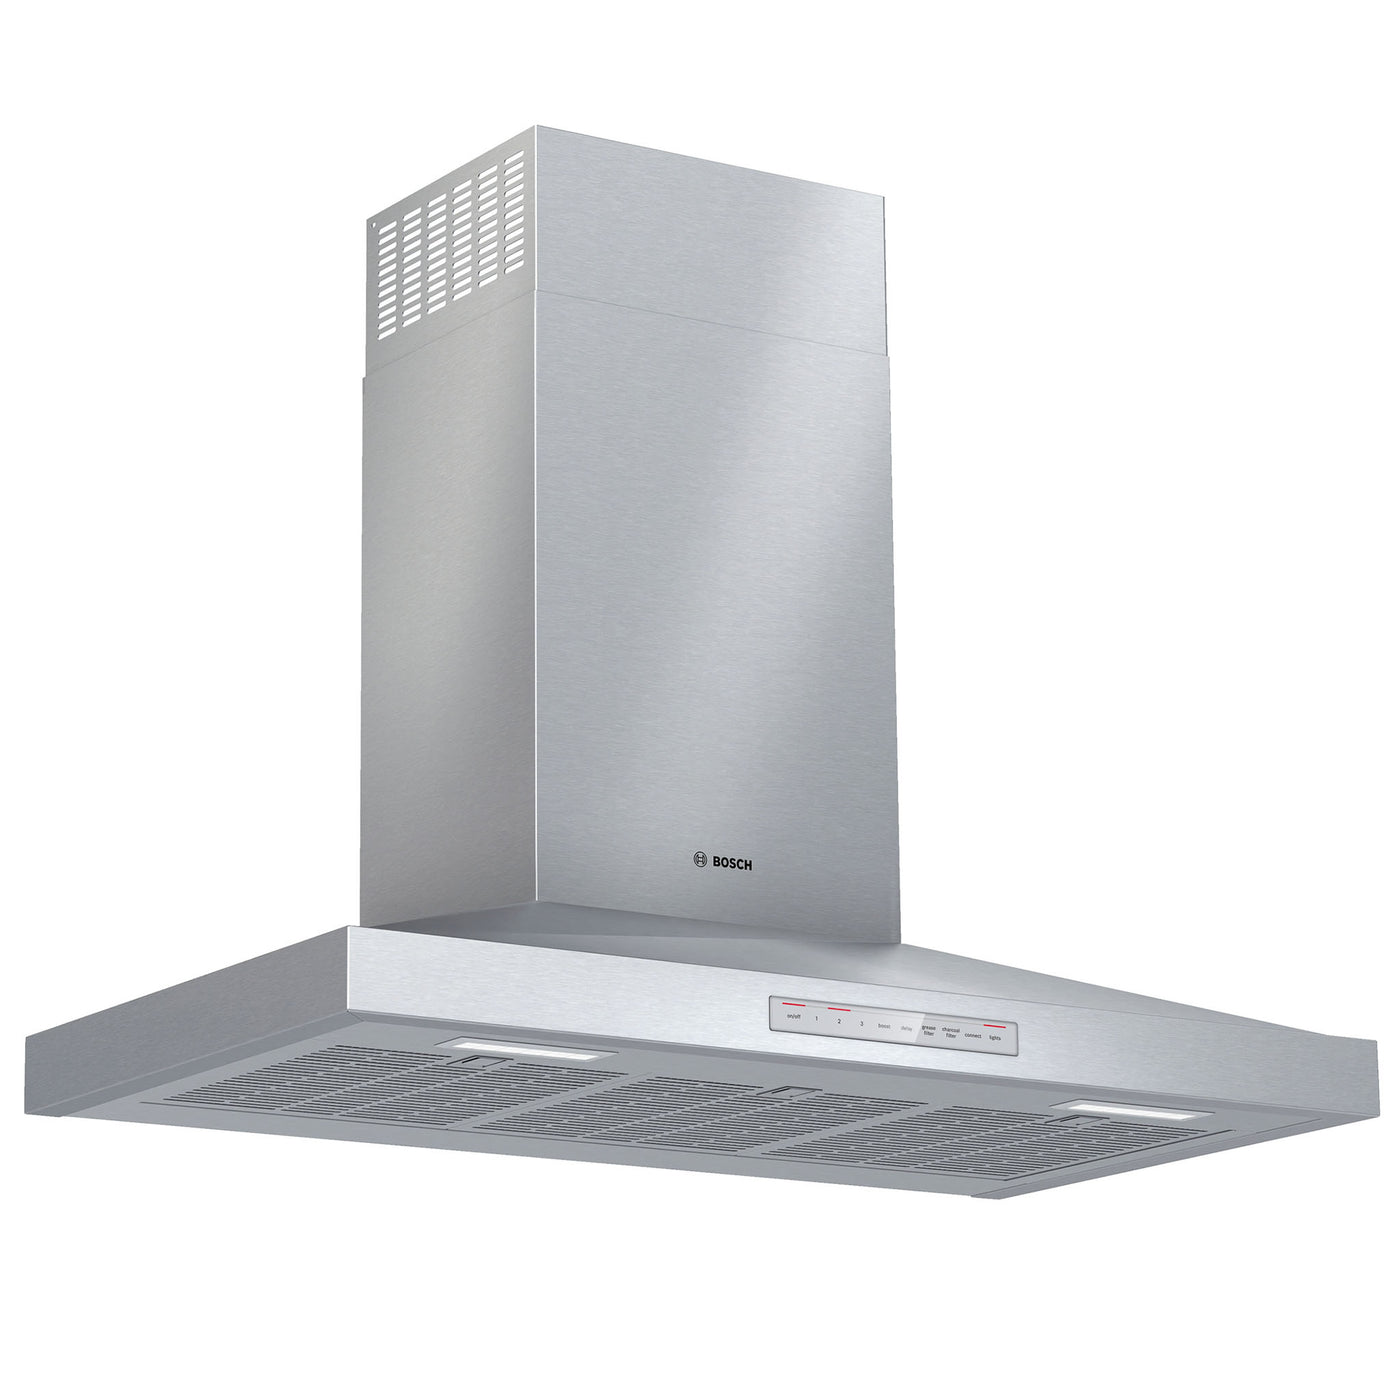  36'' 500 Series wall-mounted cooker hood Stainless steel 